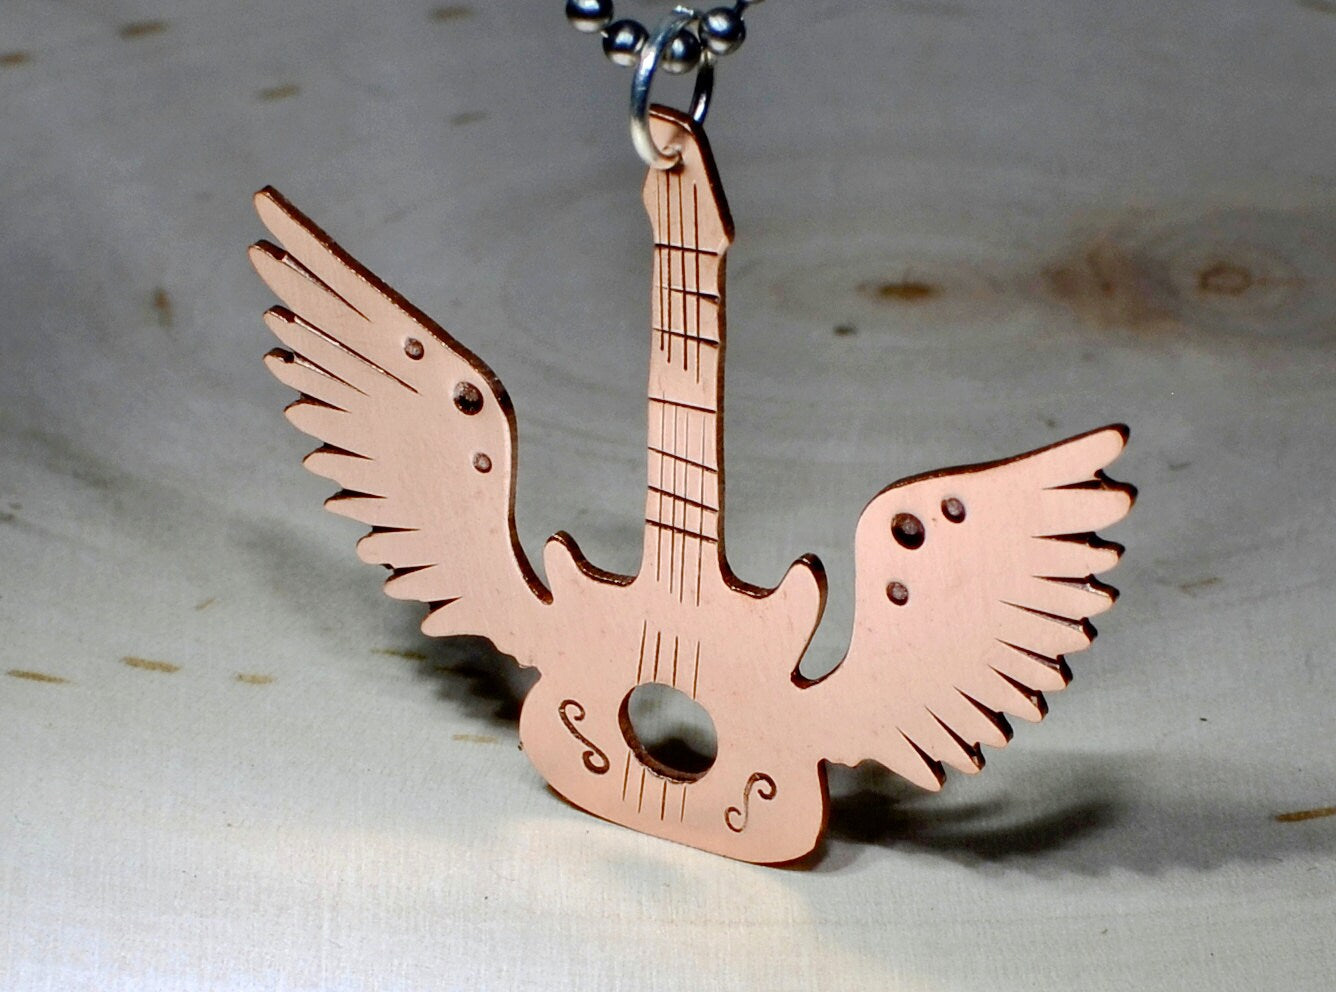 Copper winged guitar necklace